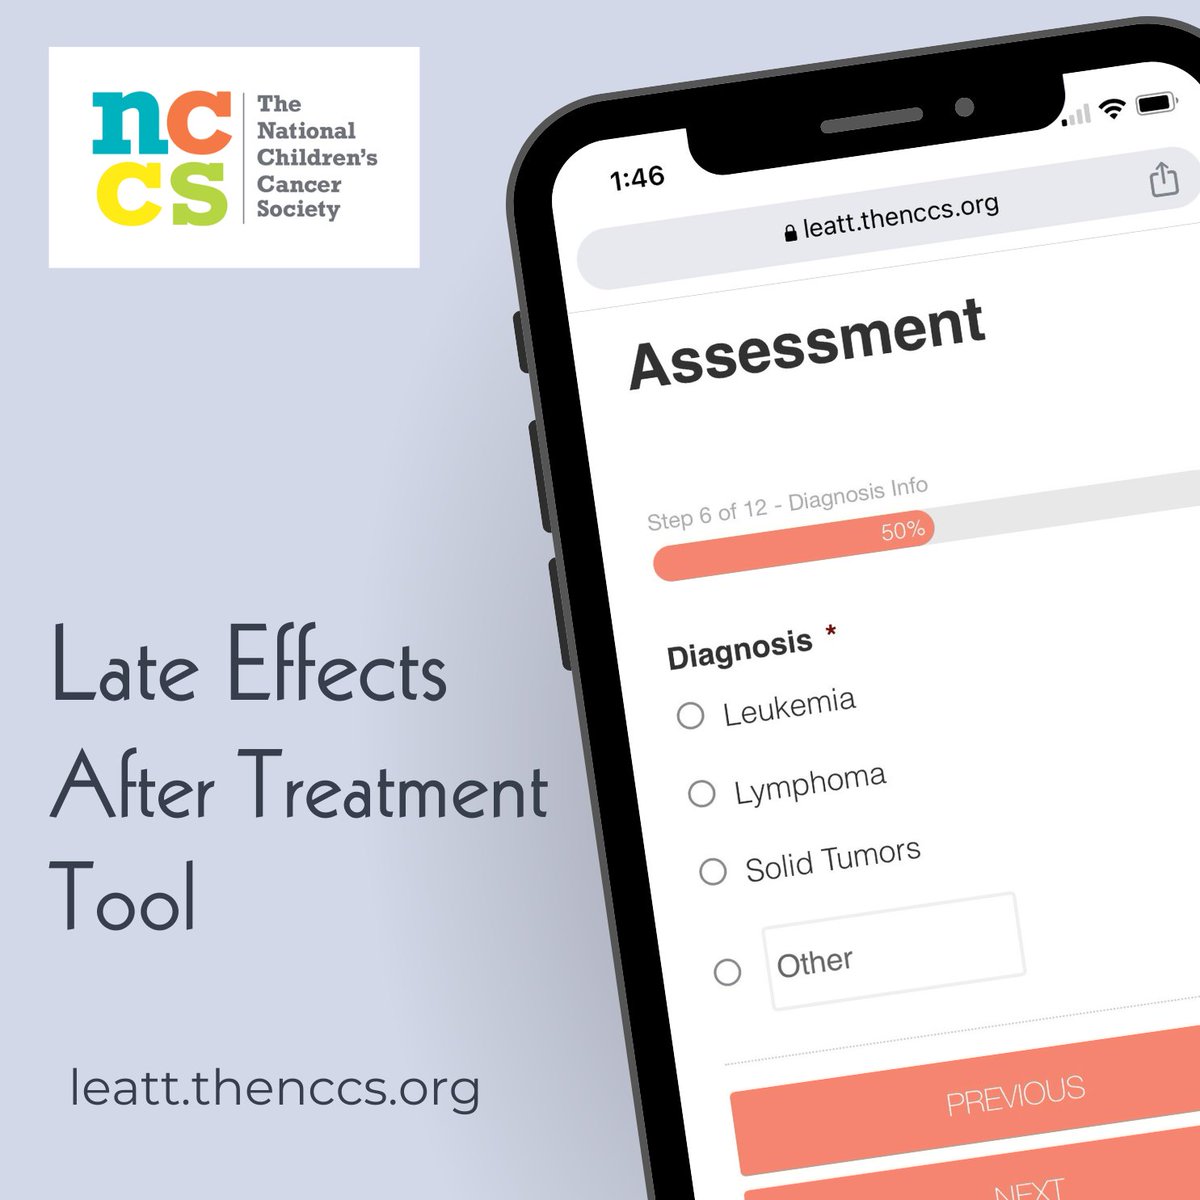 Our Late Effects After Treatment Tool (LEATT) was developed in collaboration with Robert Hayashi, M.D., Professor of Pediatrics and Director of the Late Effects Clinic at @STLChildrens / @WUSTLmed. Try it at leatt.thenccs.org.
#theNCCS #childhoodcancer #LEATT #WashU